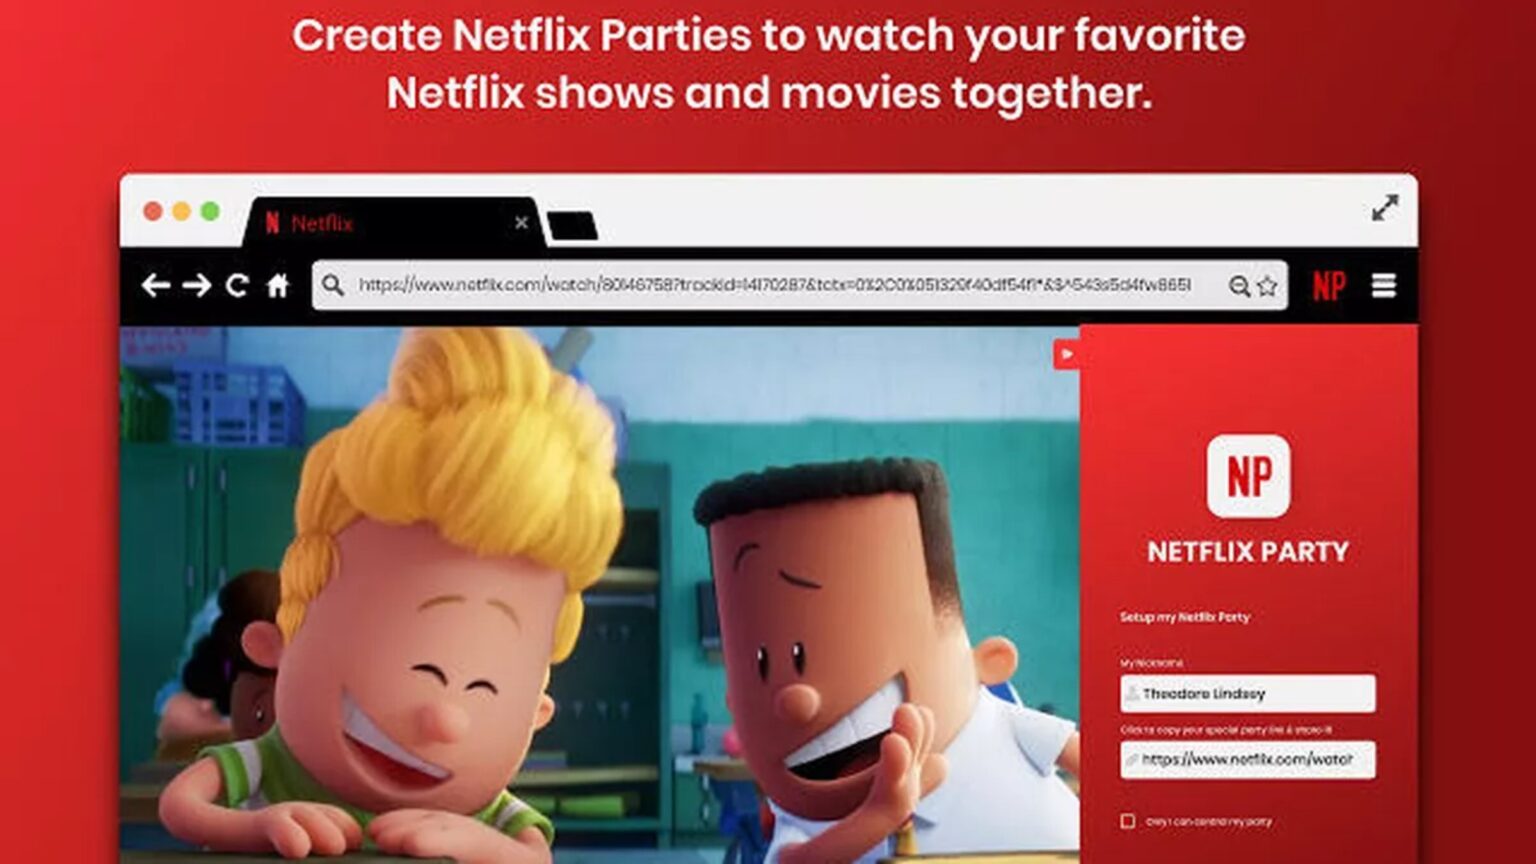 The Netflix Party extension is going by a new name and has some new features. Here's everything you need to know about the update.